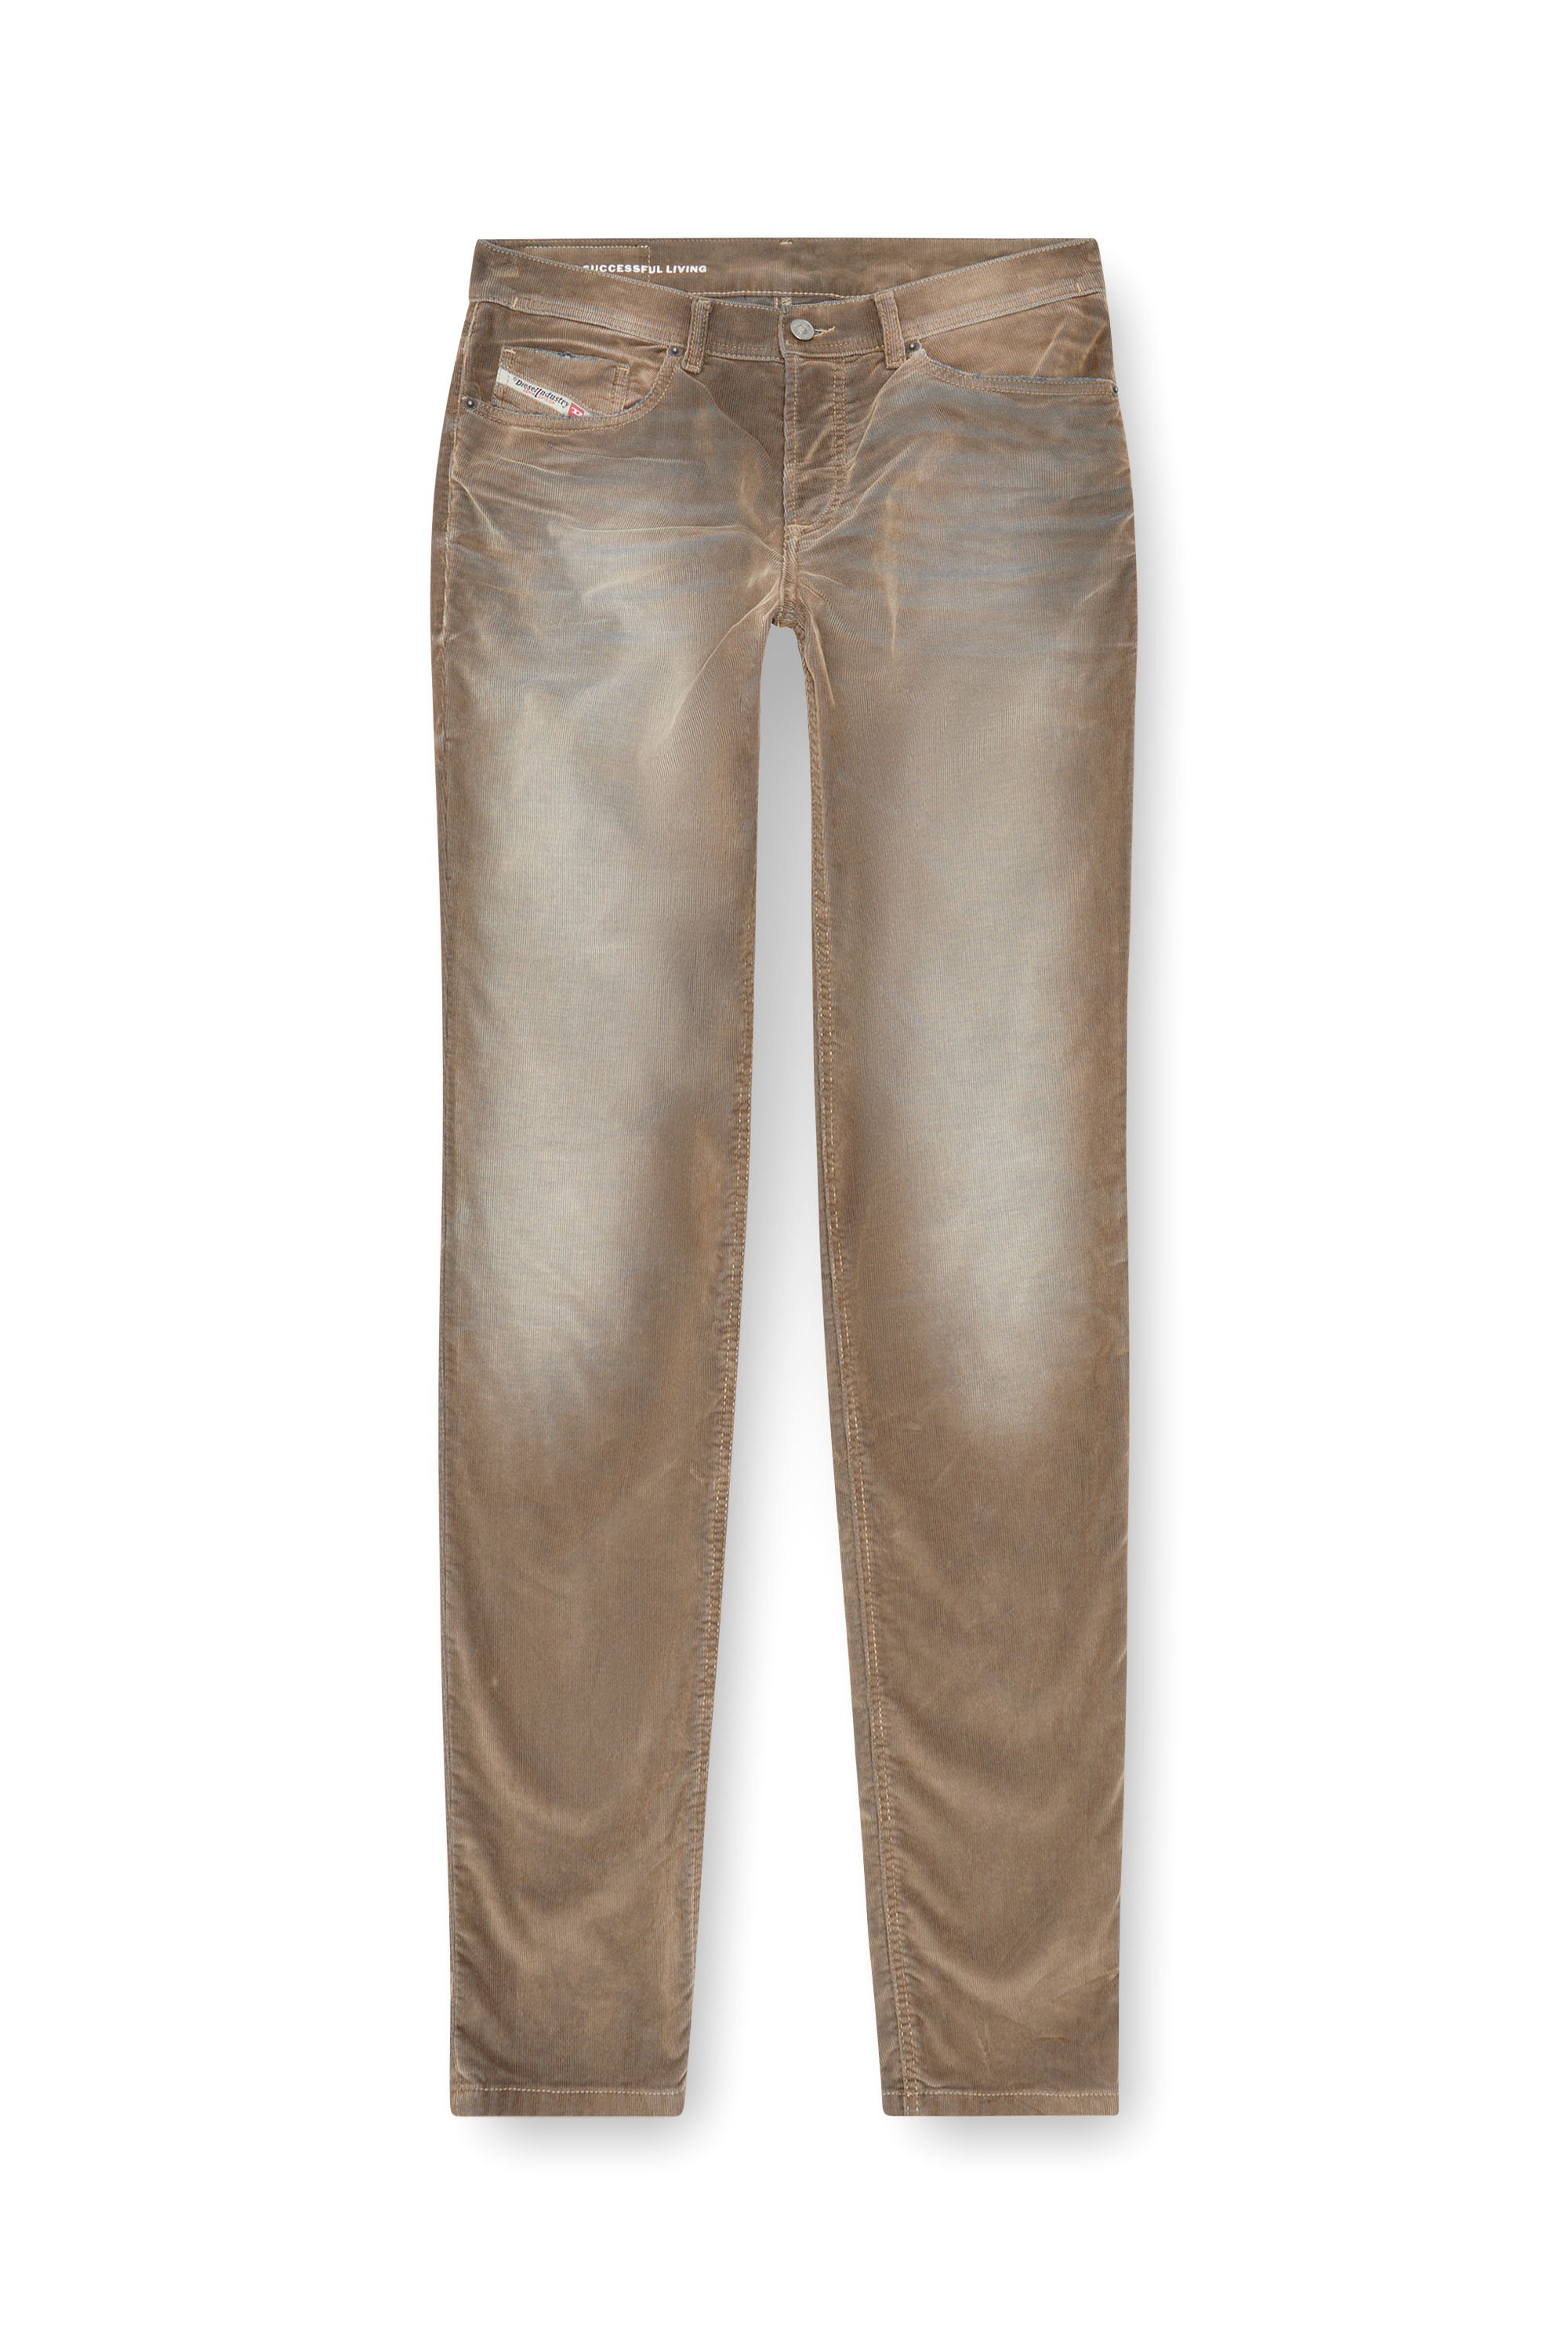 Diesel - Tapered Jeans 2023 D-Finitive 003II, Hombre Tapered Jeans - 2023 D-Finitive in Gris - Image 3